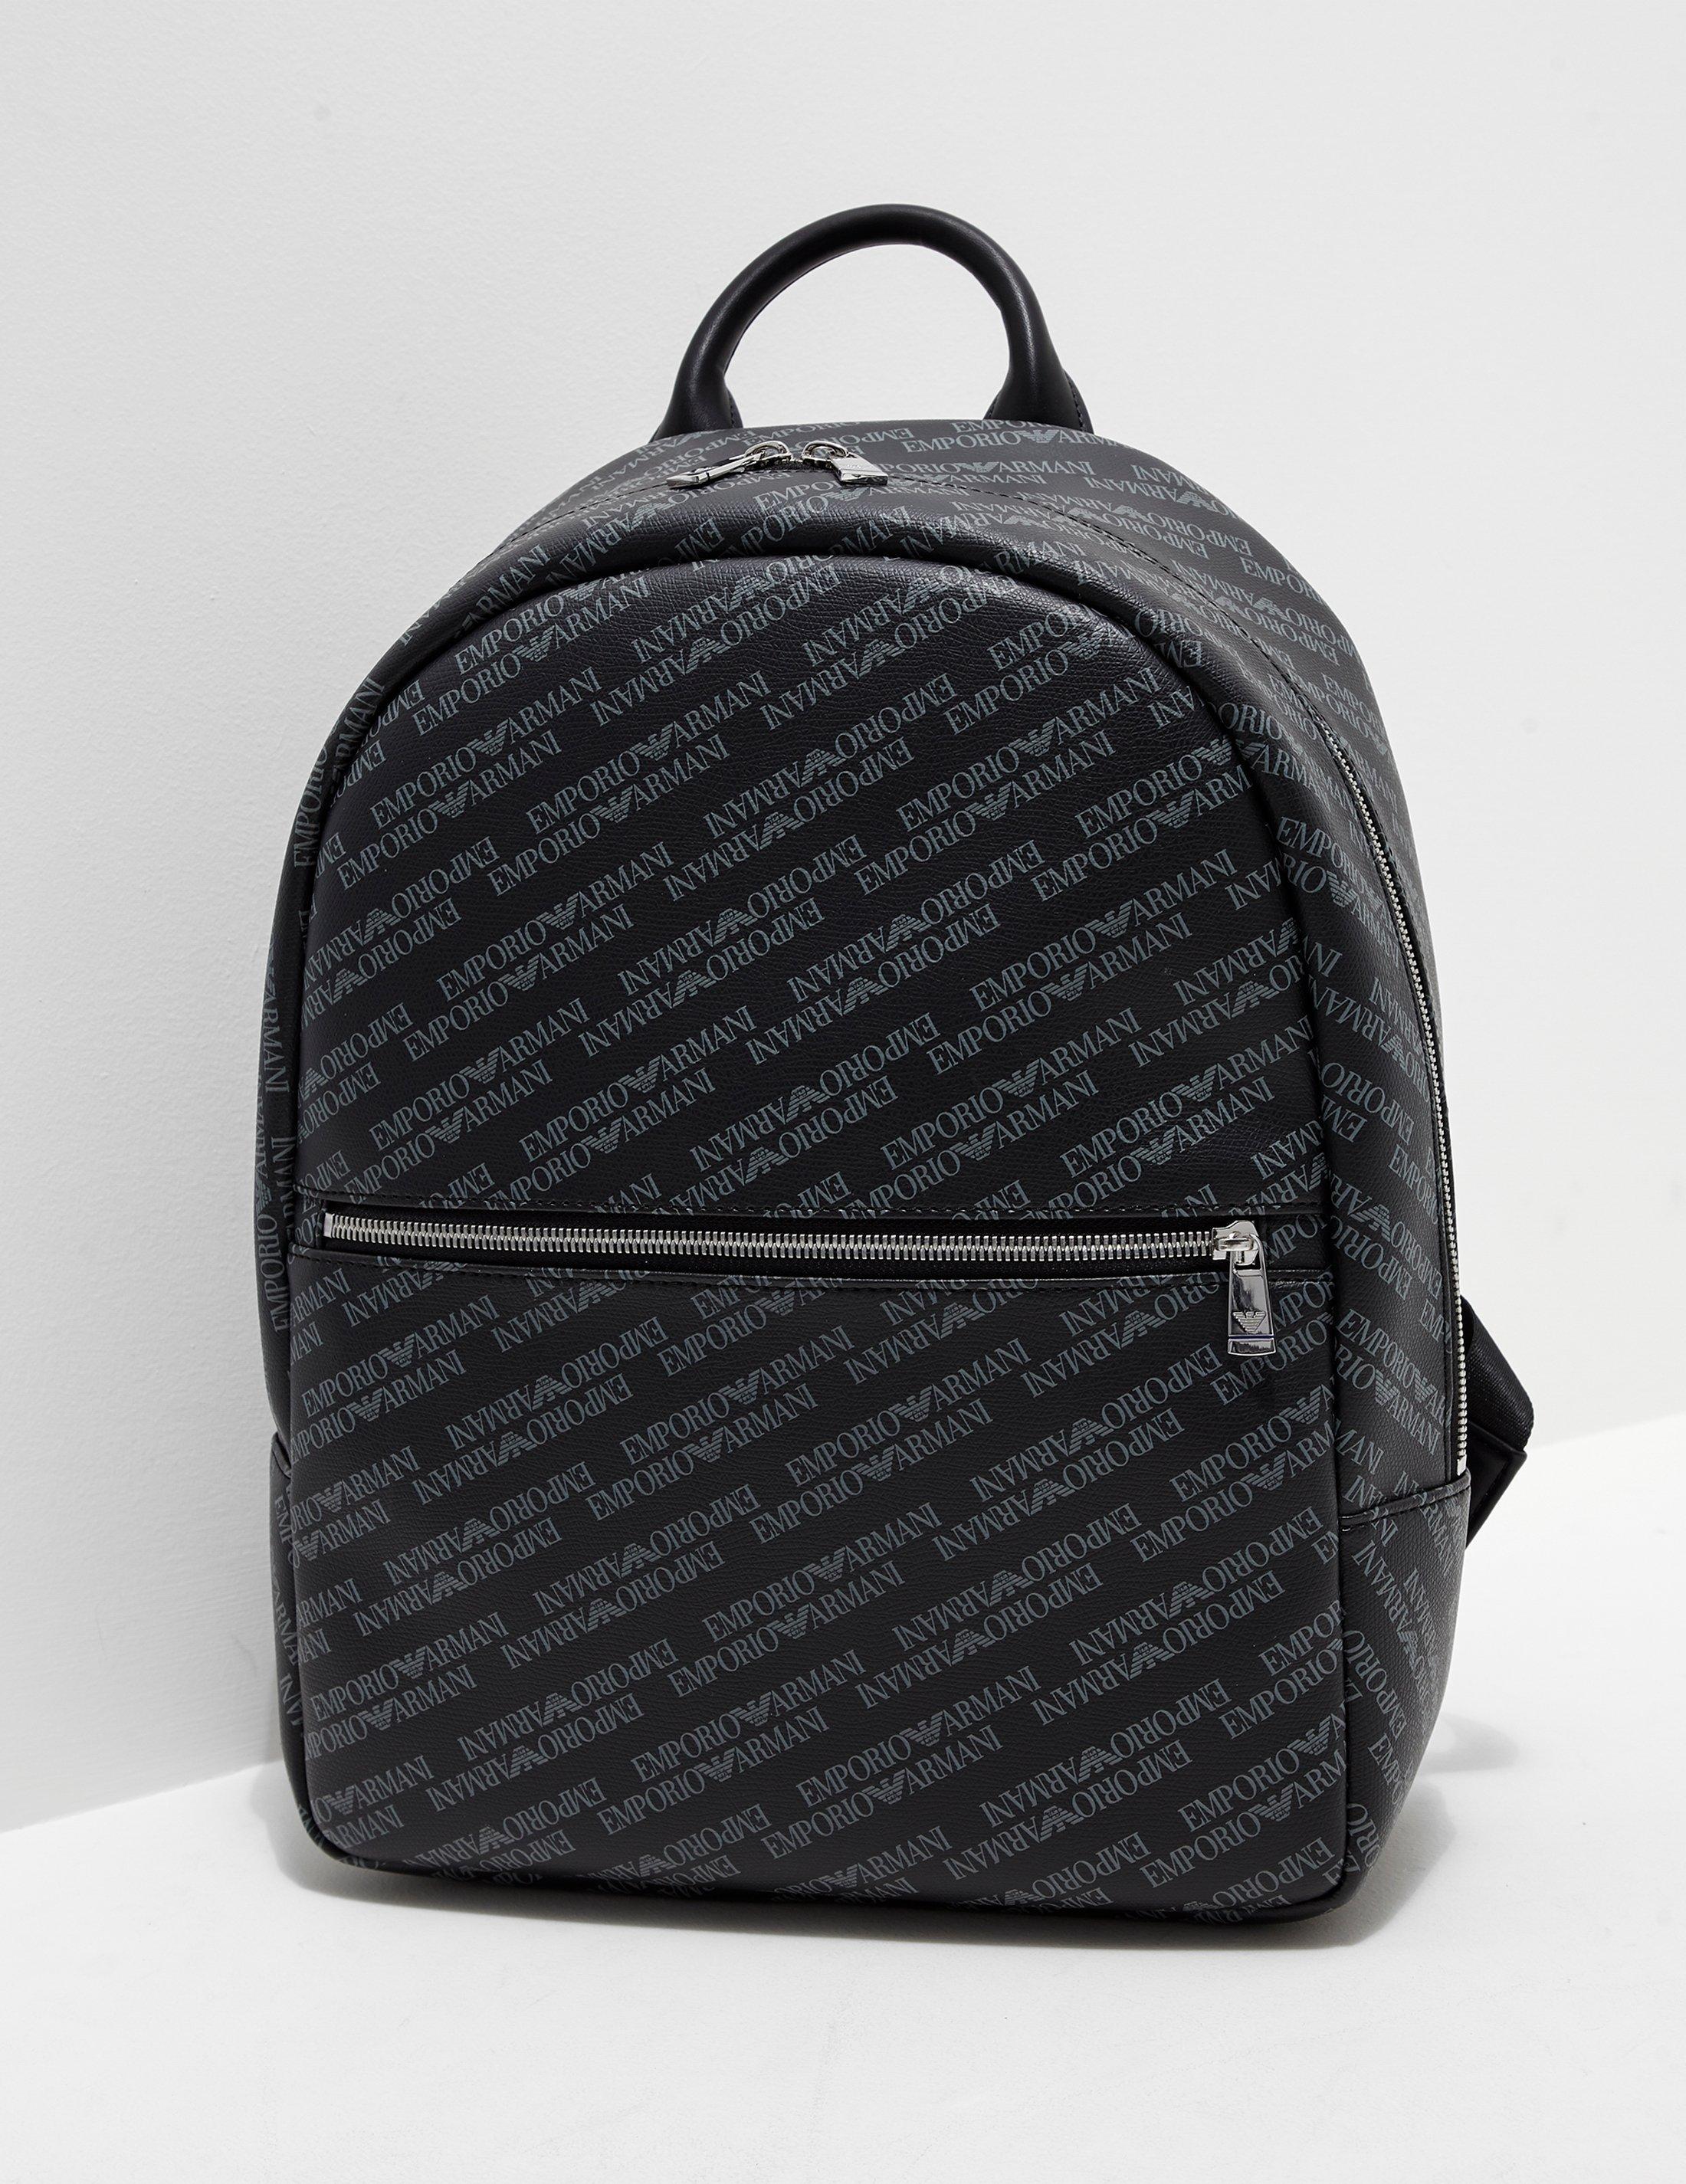 Emporio Armani Leather Mens All Over Print Backpack Black for Men - Lyst